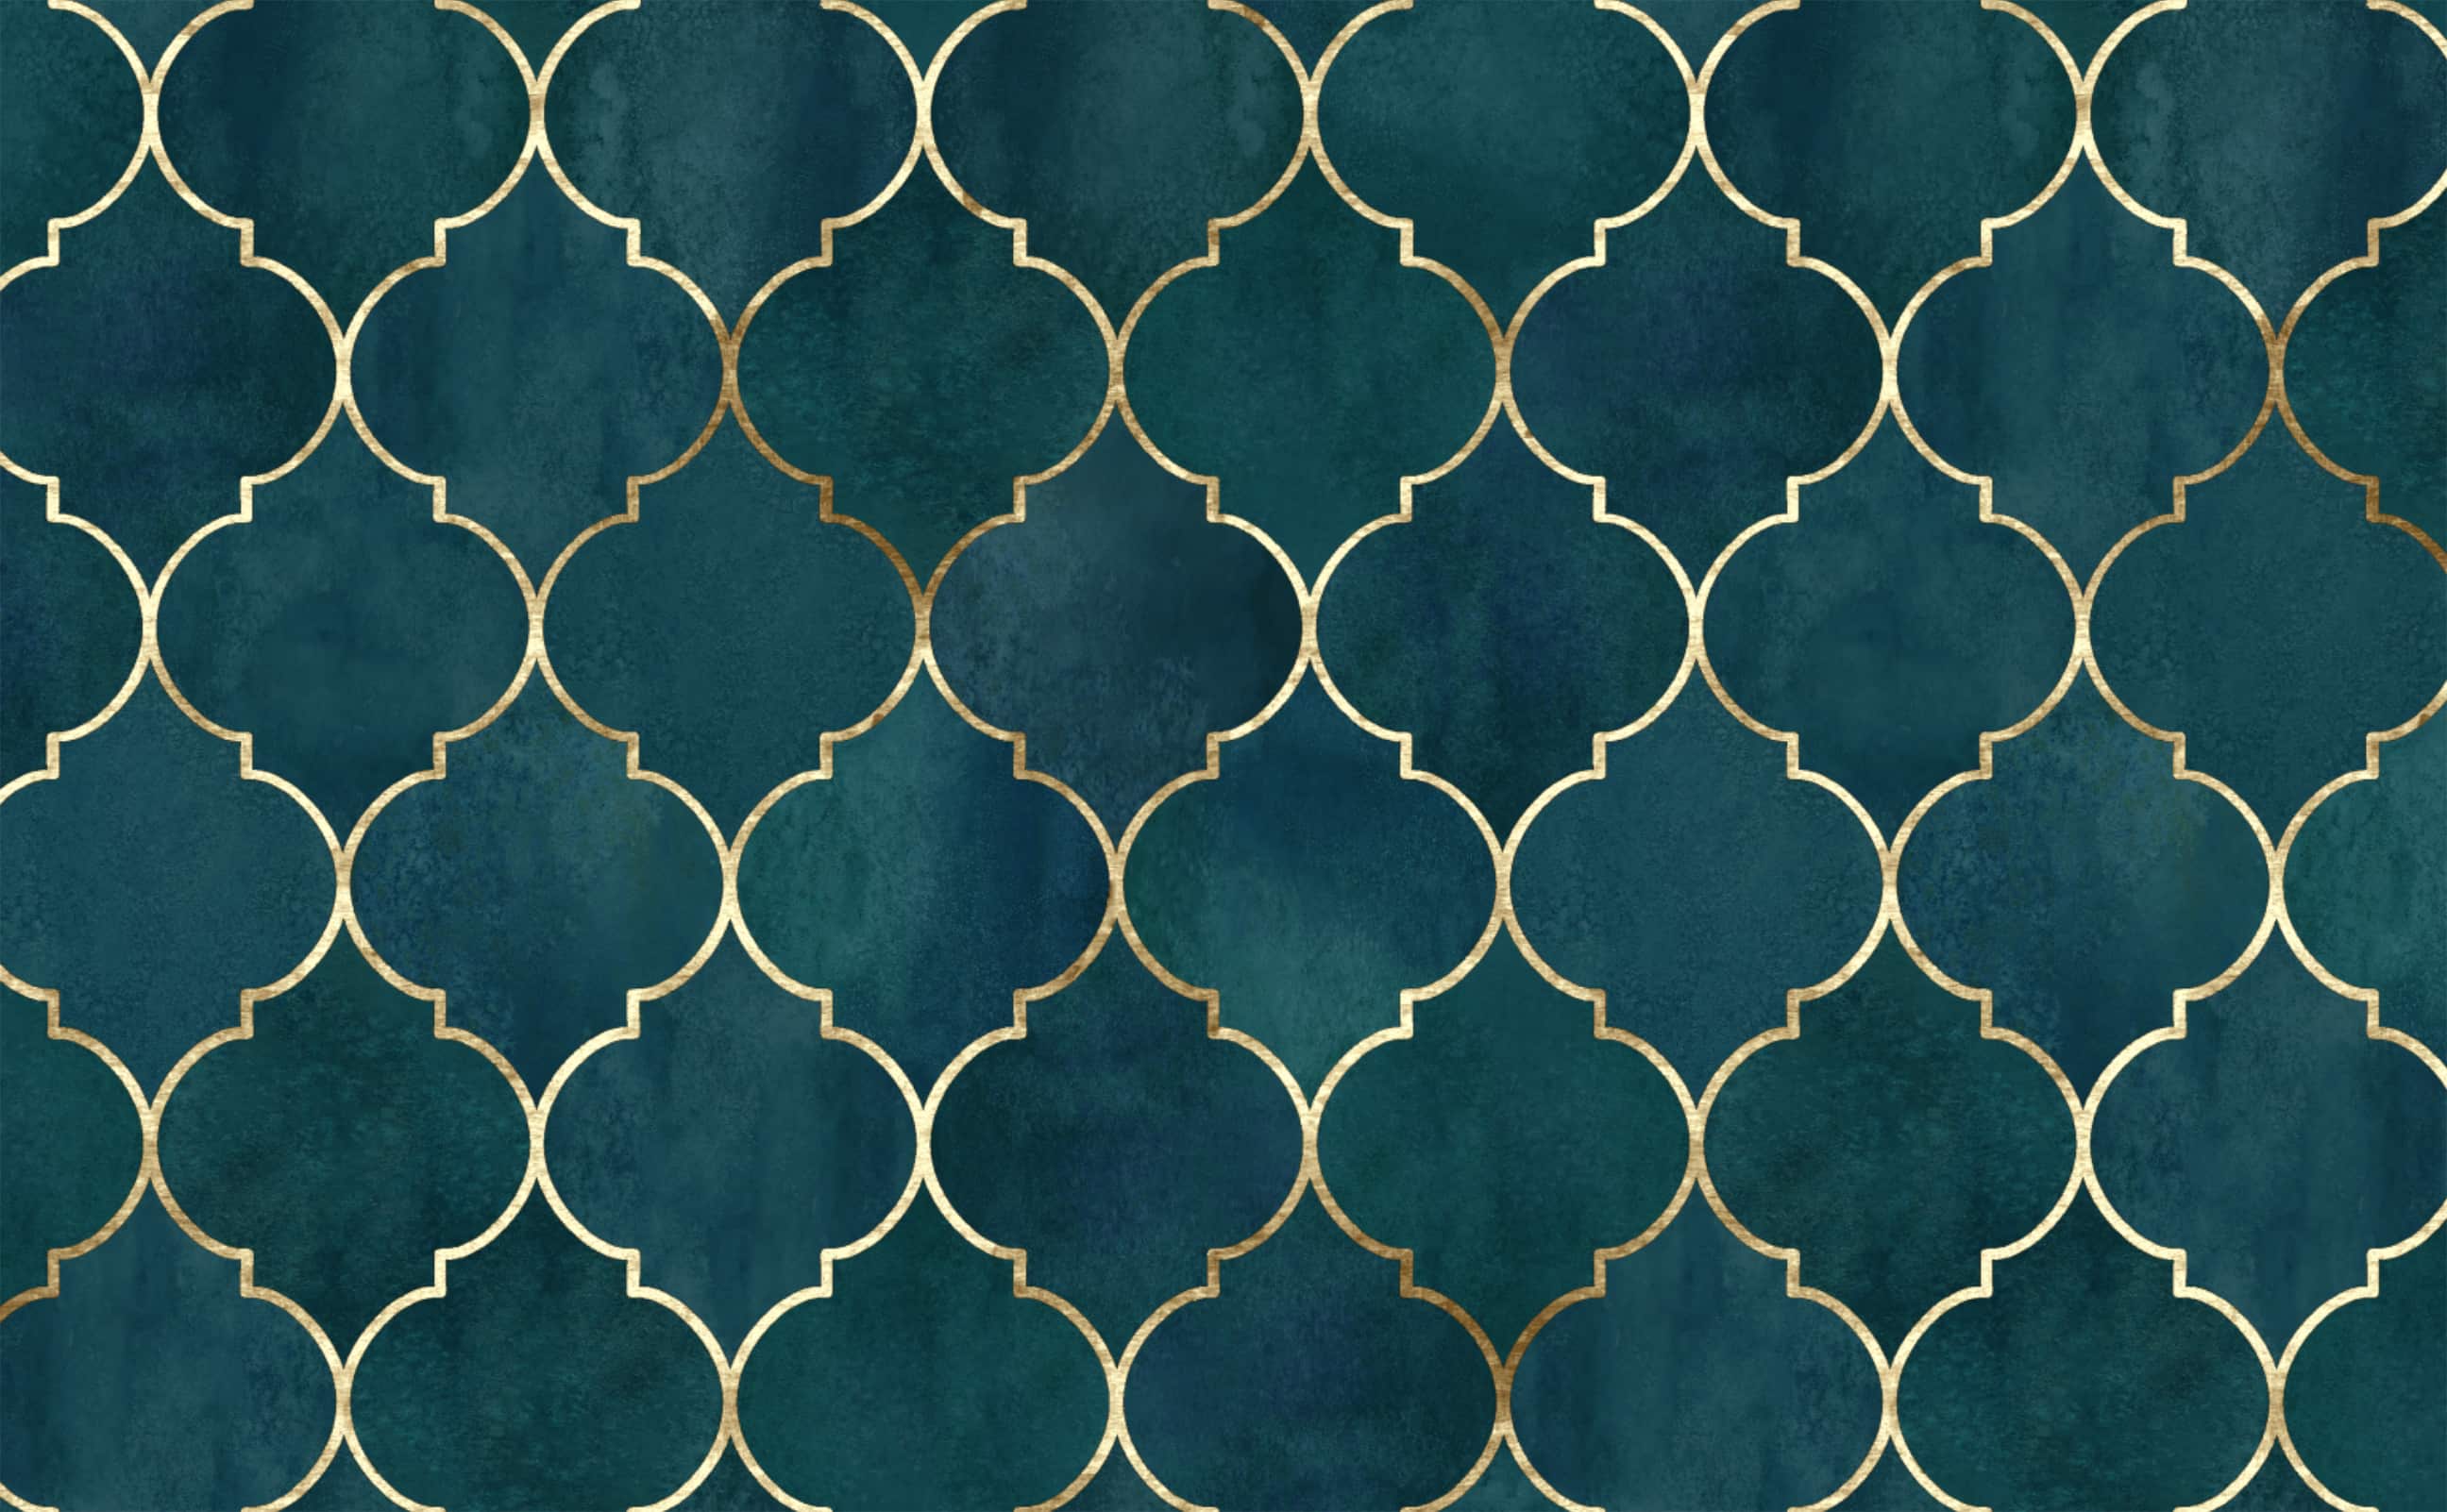 A blue and gold patterned wallpaper - Boho